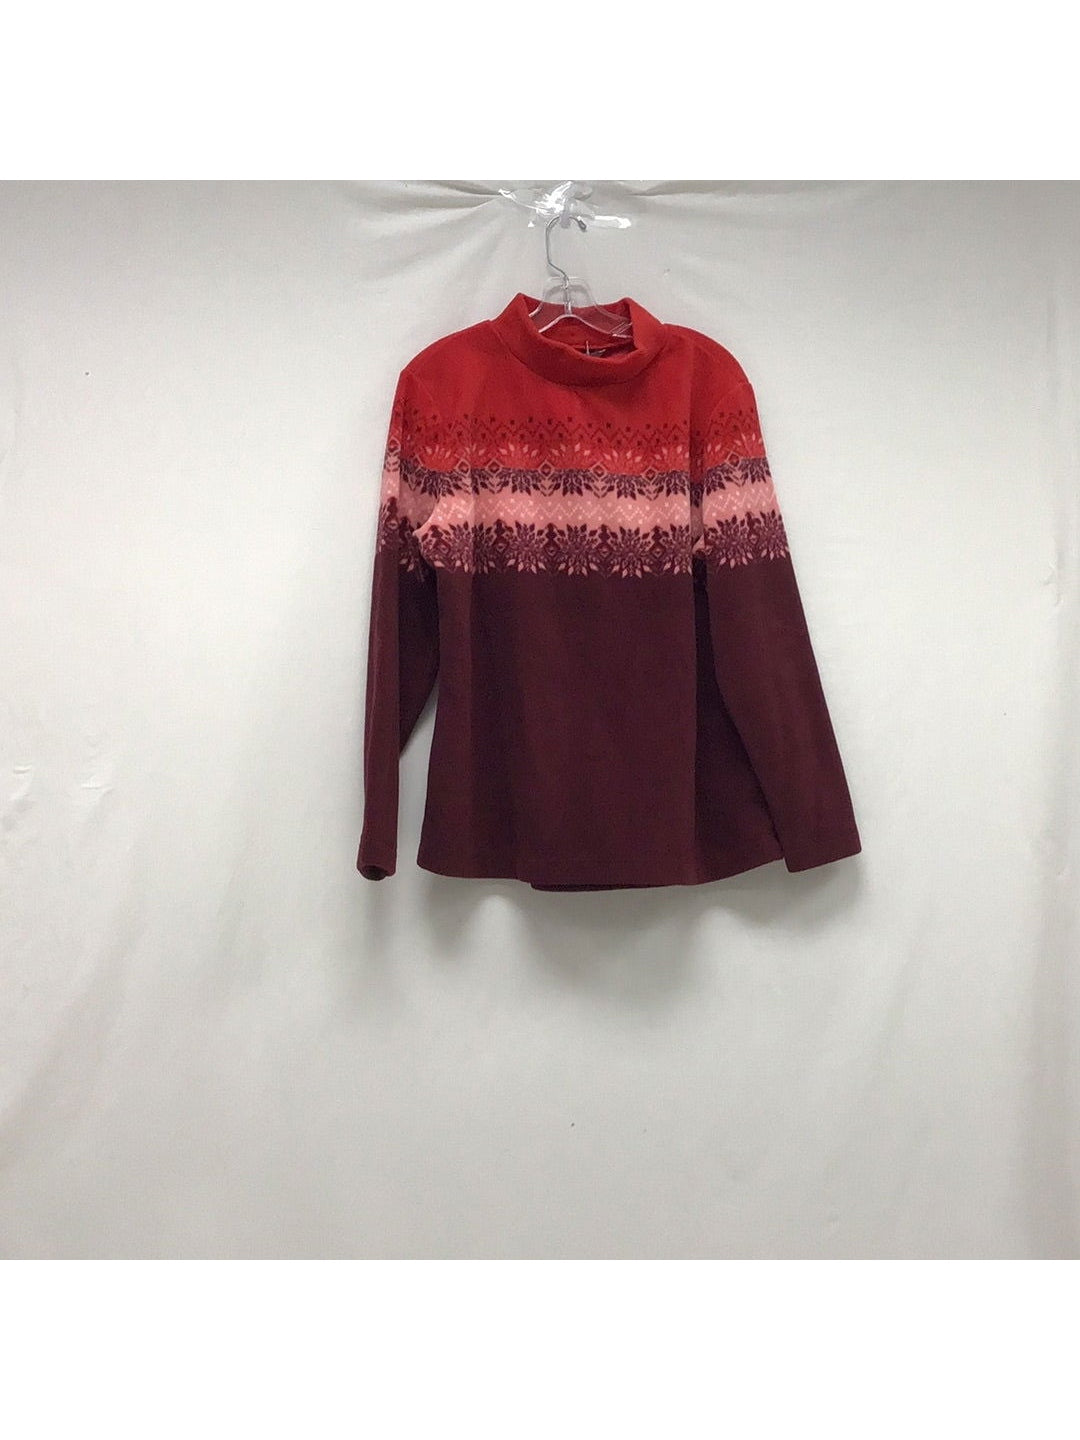 Croft & Barrow Women Red , Pink And Purple Sweater Size Large - The Kennedy Collective Thrift - 